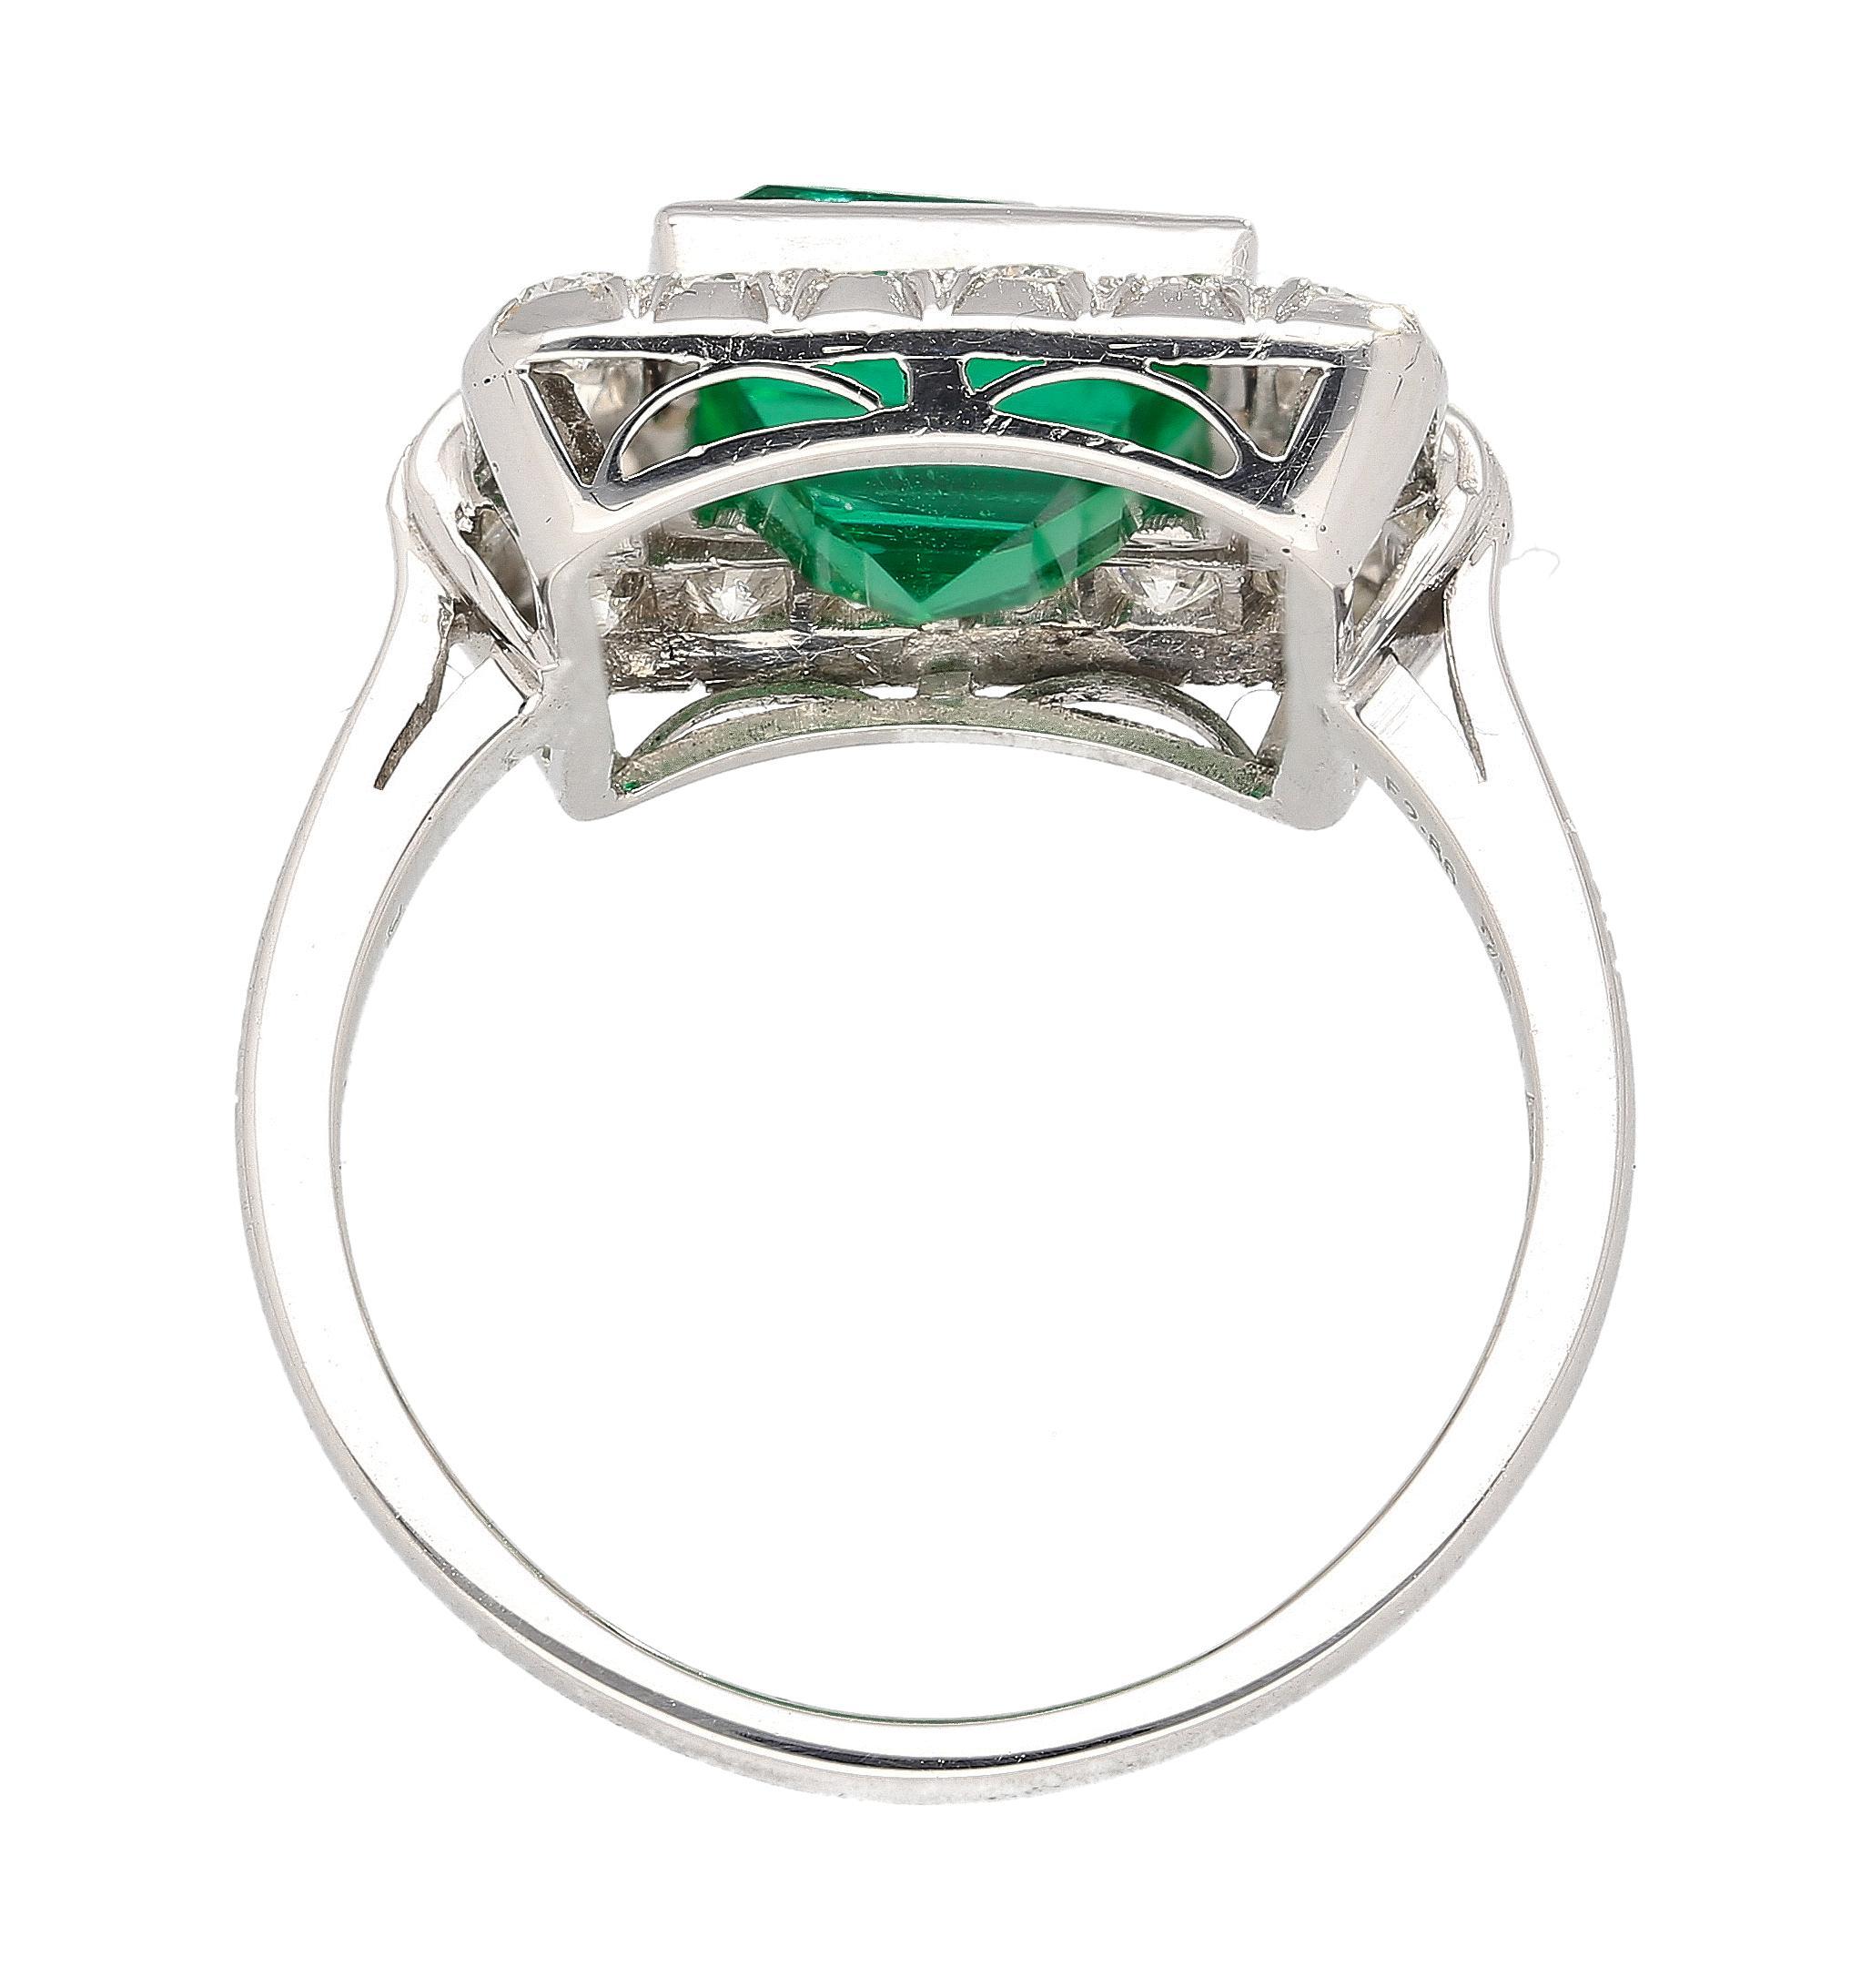 AGL Certified 2.86 Carat Minor Oil Afghan/China Border Origin Emerald and Diamond Halo in 18k White Gold Bezel Set Ring.

Crafted in 18K white gold, natural green 2.86-carat weight emerald, with a rectangular-step cut. Emerald origin comes from the